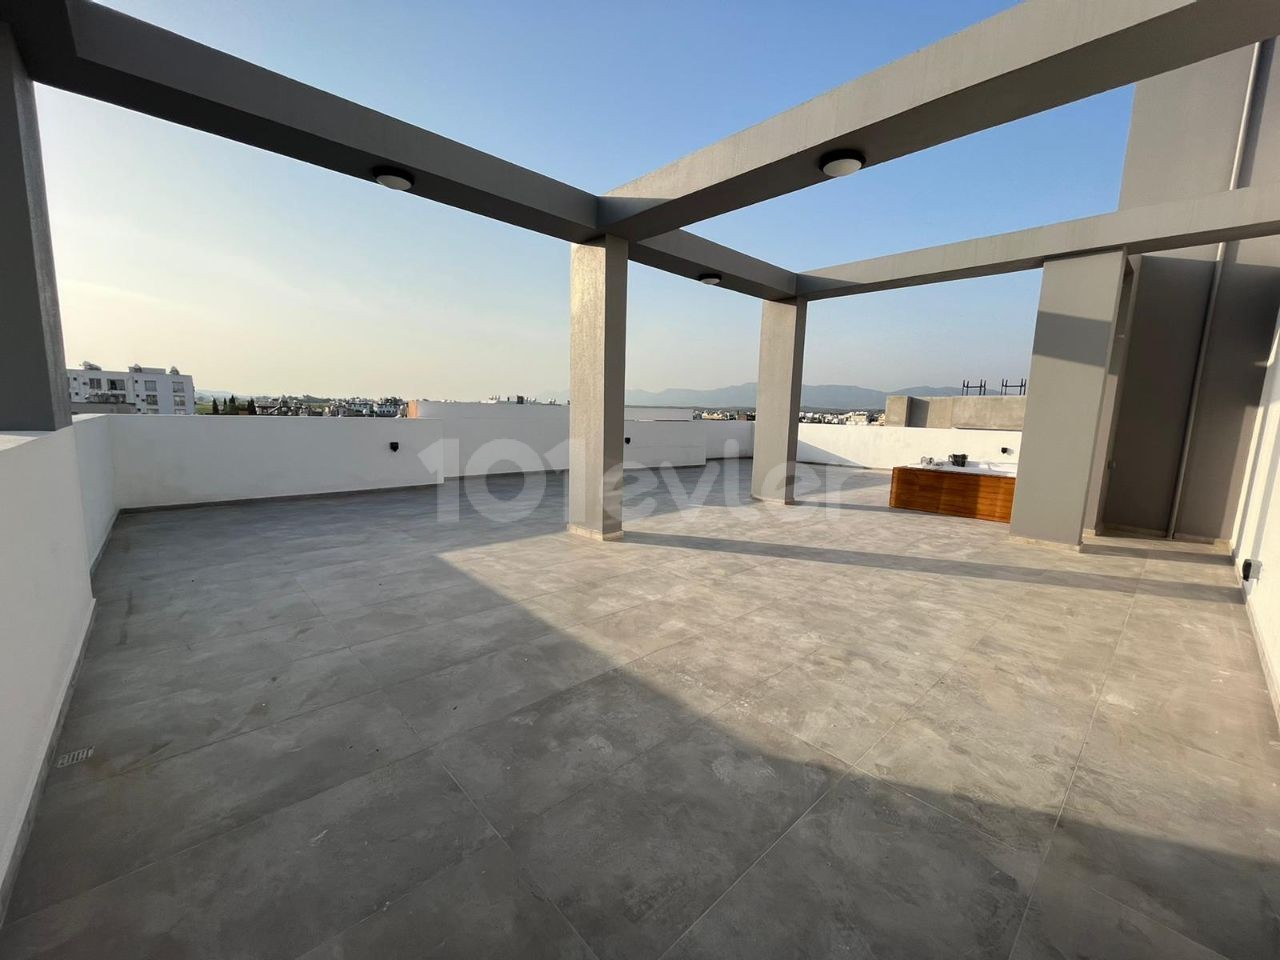 LUXURY 2+1 PENTHOUSE FOR SALE WITH PRIVATE JACUZZI ON THE TERRACE IN GÖNYELI LEFKOŞA!!!